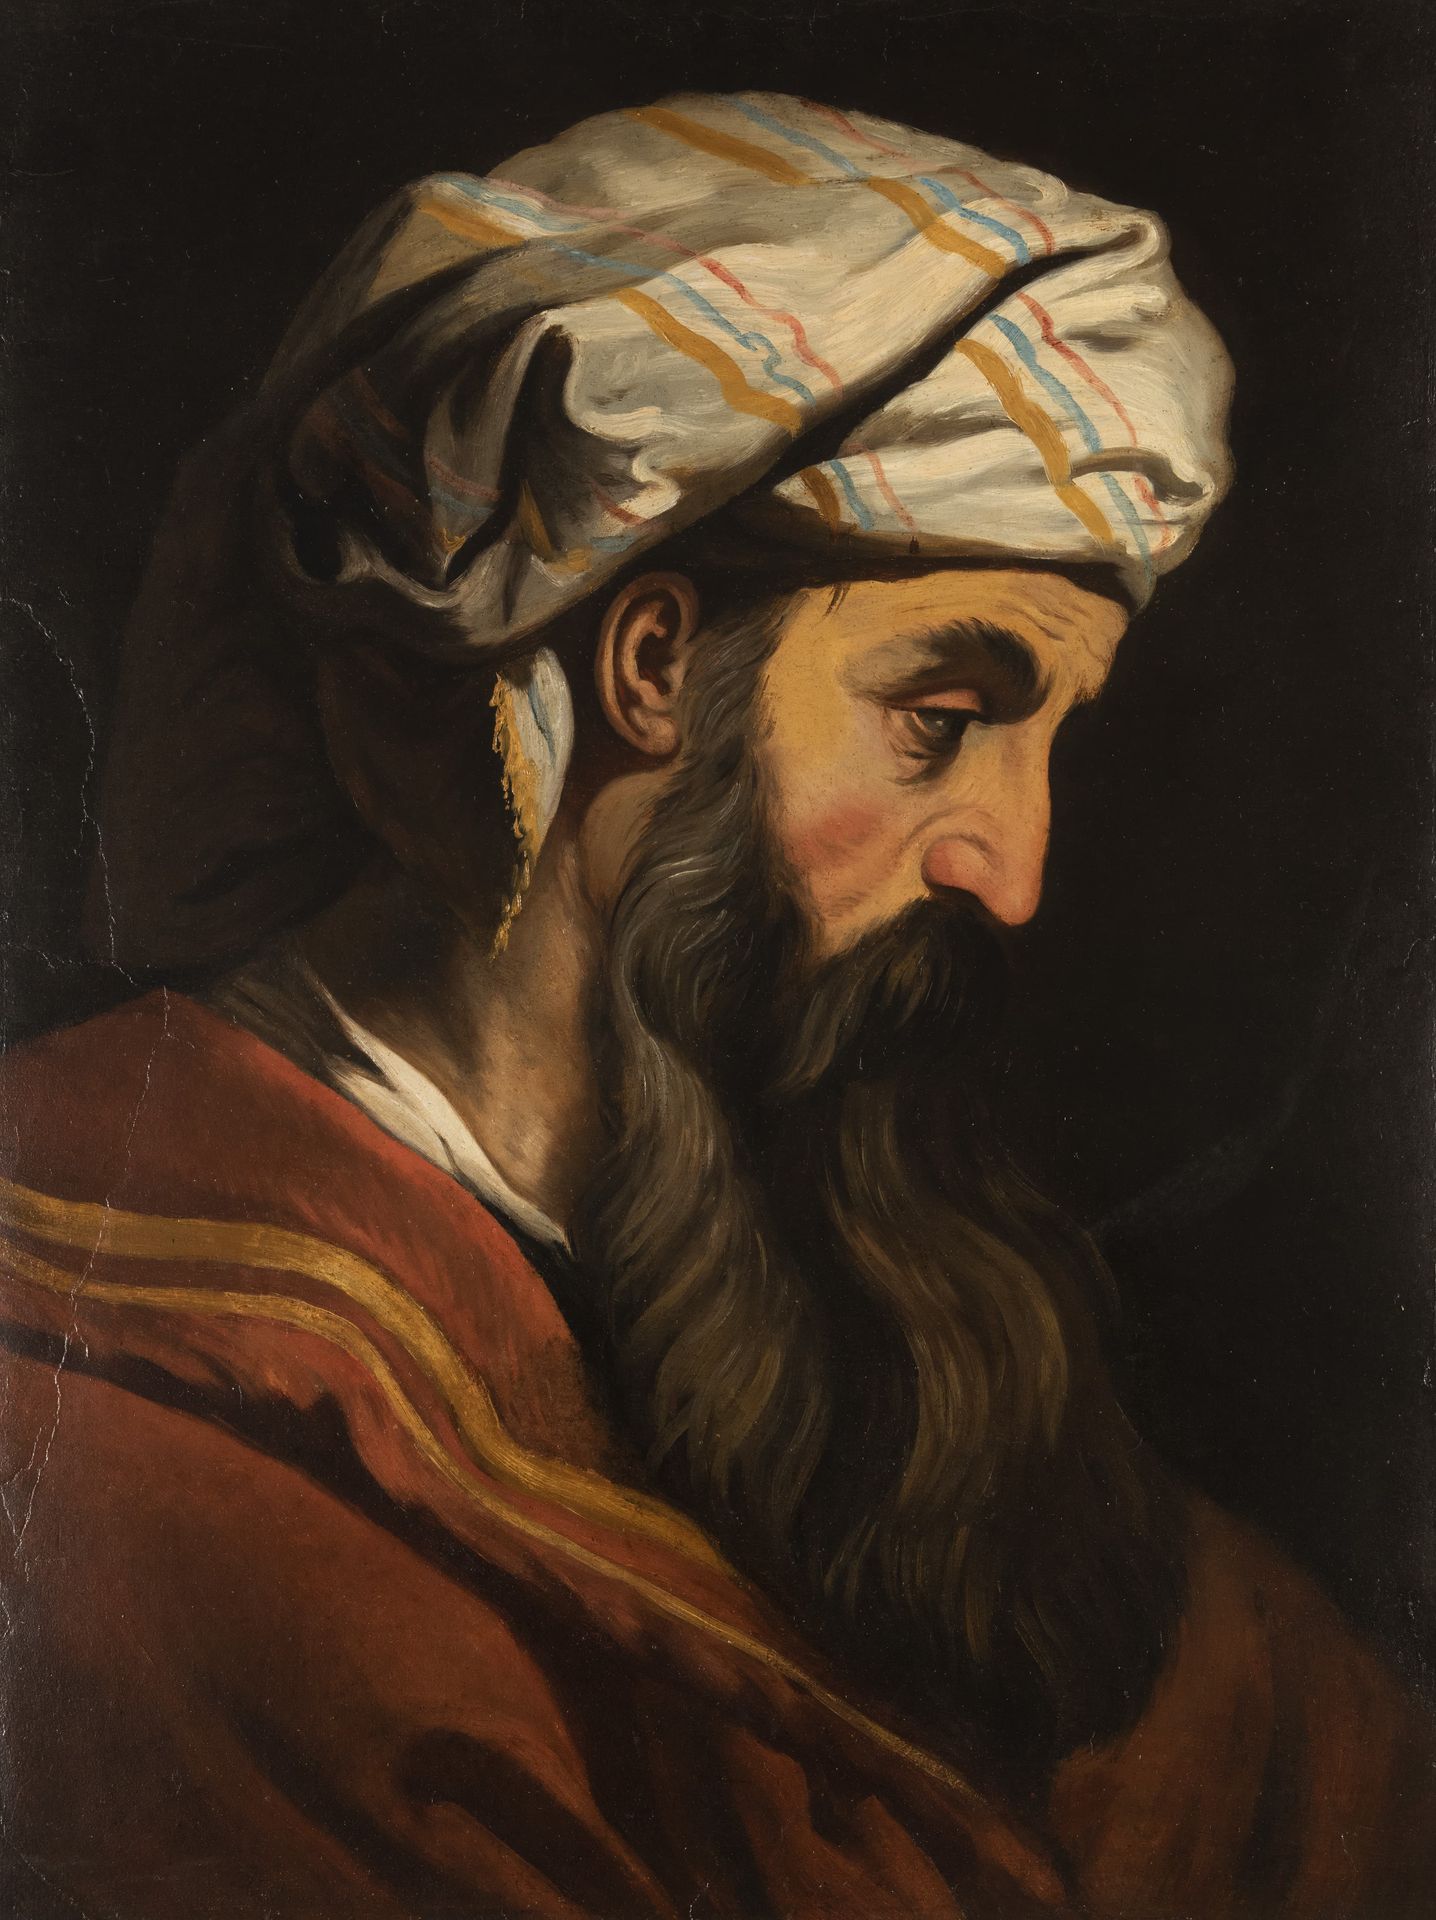 Null NINETEENTH CENTURY FRENCH SCHOOL
Man with turban
Oil on paper
64.5 x 48.5 c&hellip;